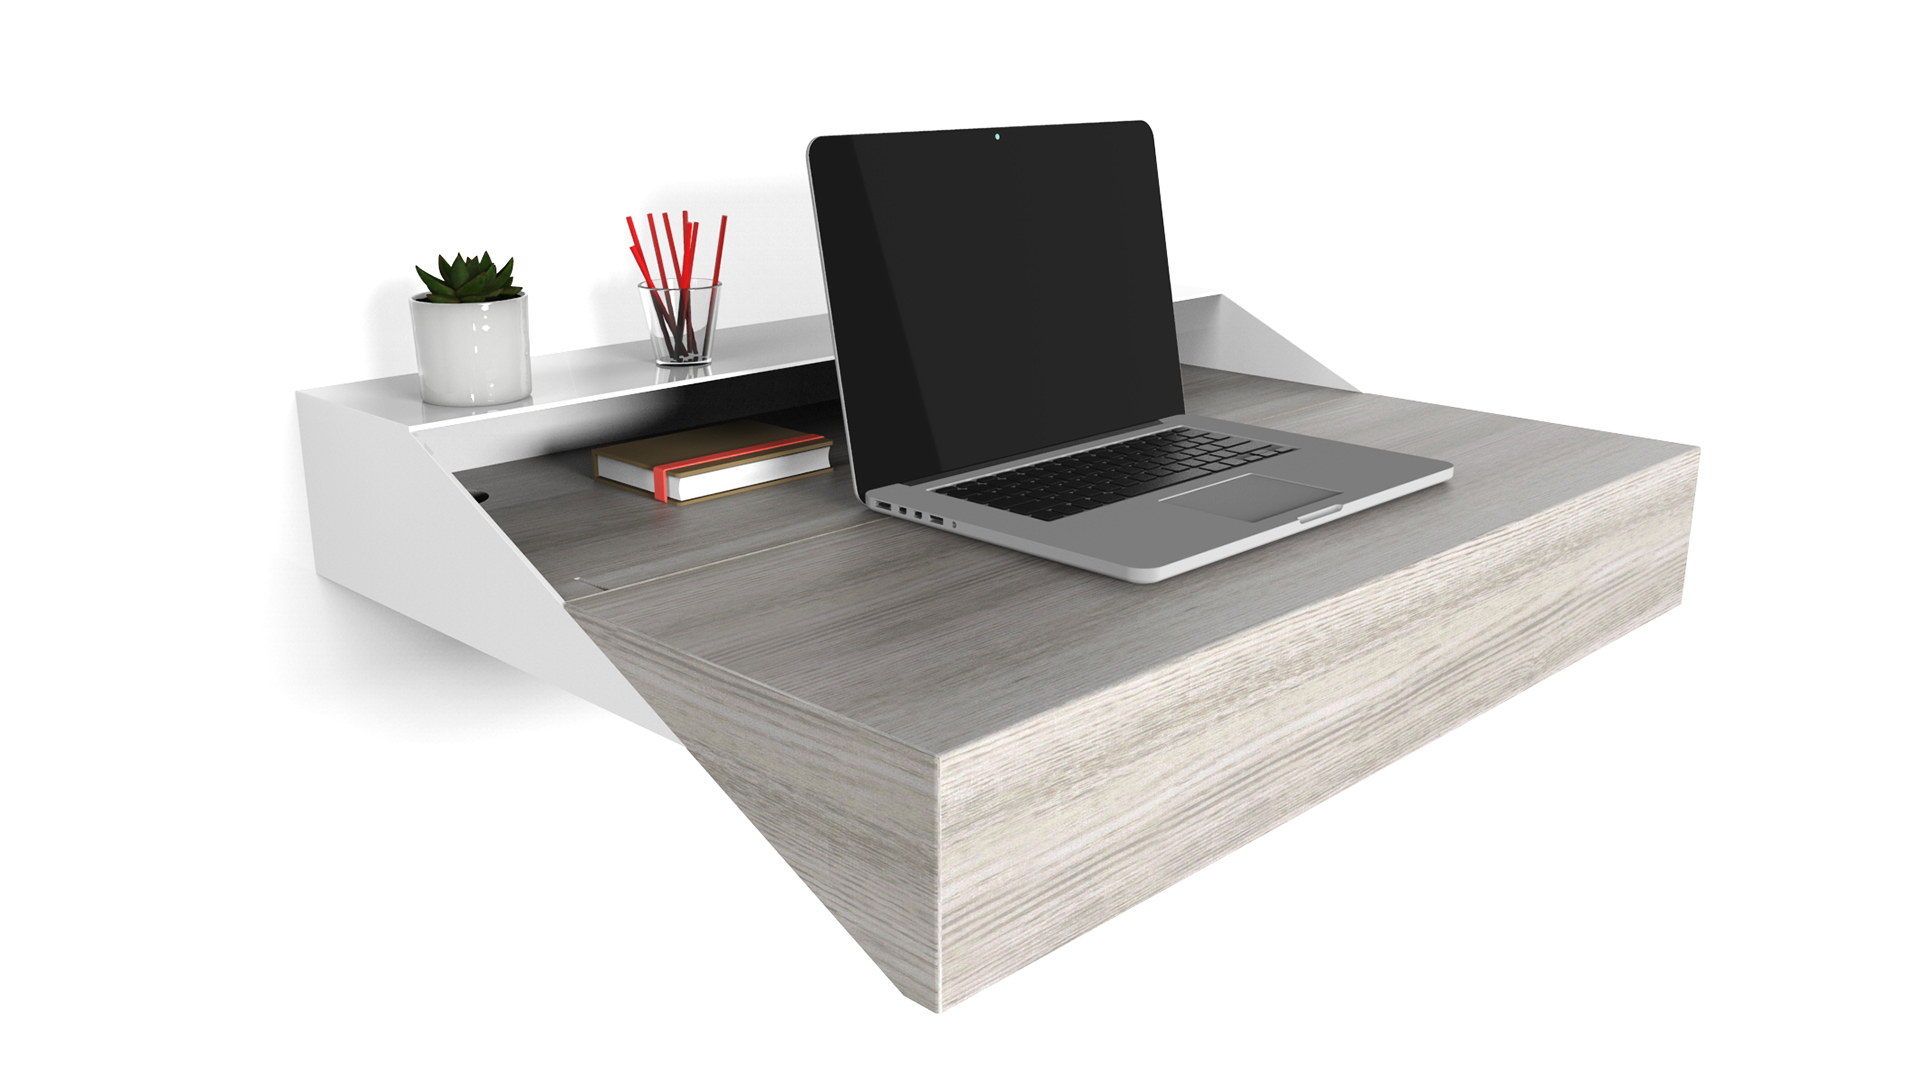 Xin-wd-wht-gray Wall Mounted Hideaway Desk With Expanding Top Enclosure - White Metal & Gray Wood - 31.5 X 17.25 X 5 In.